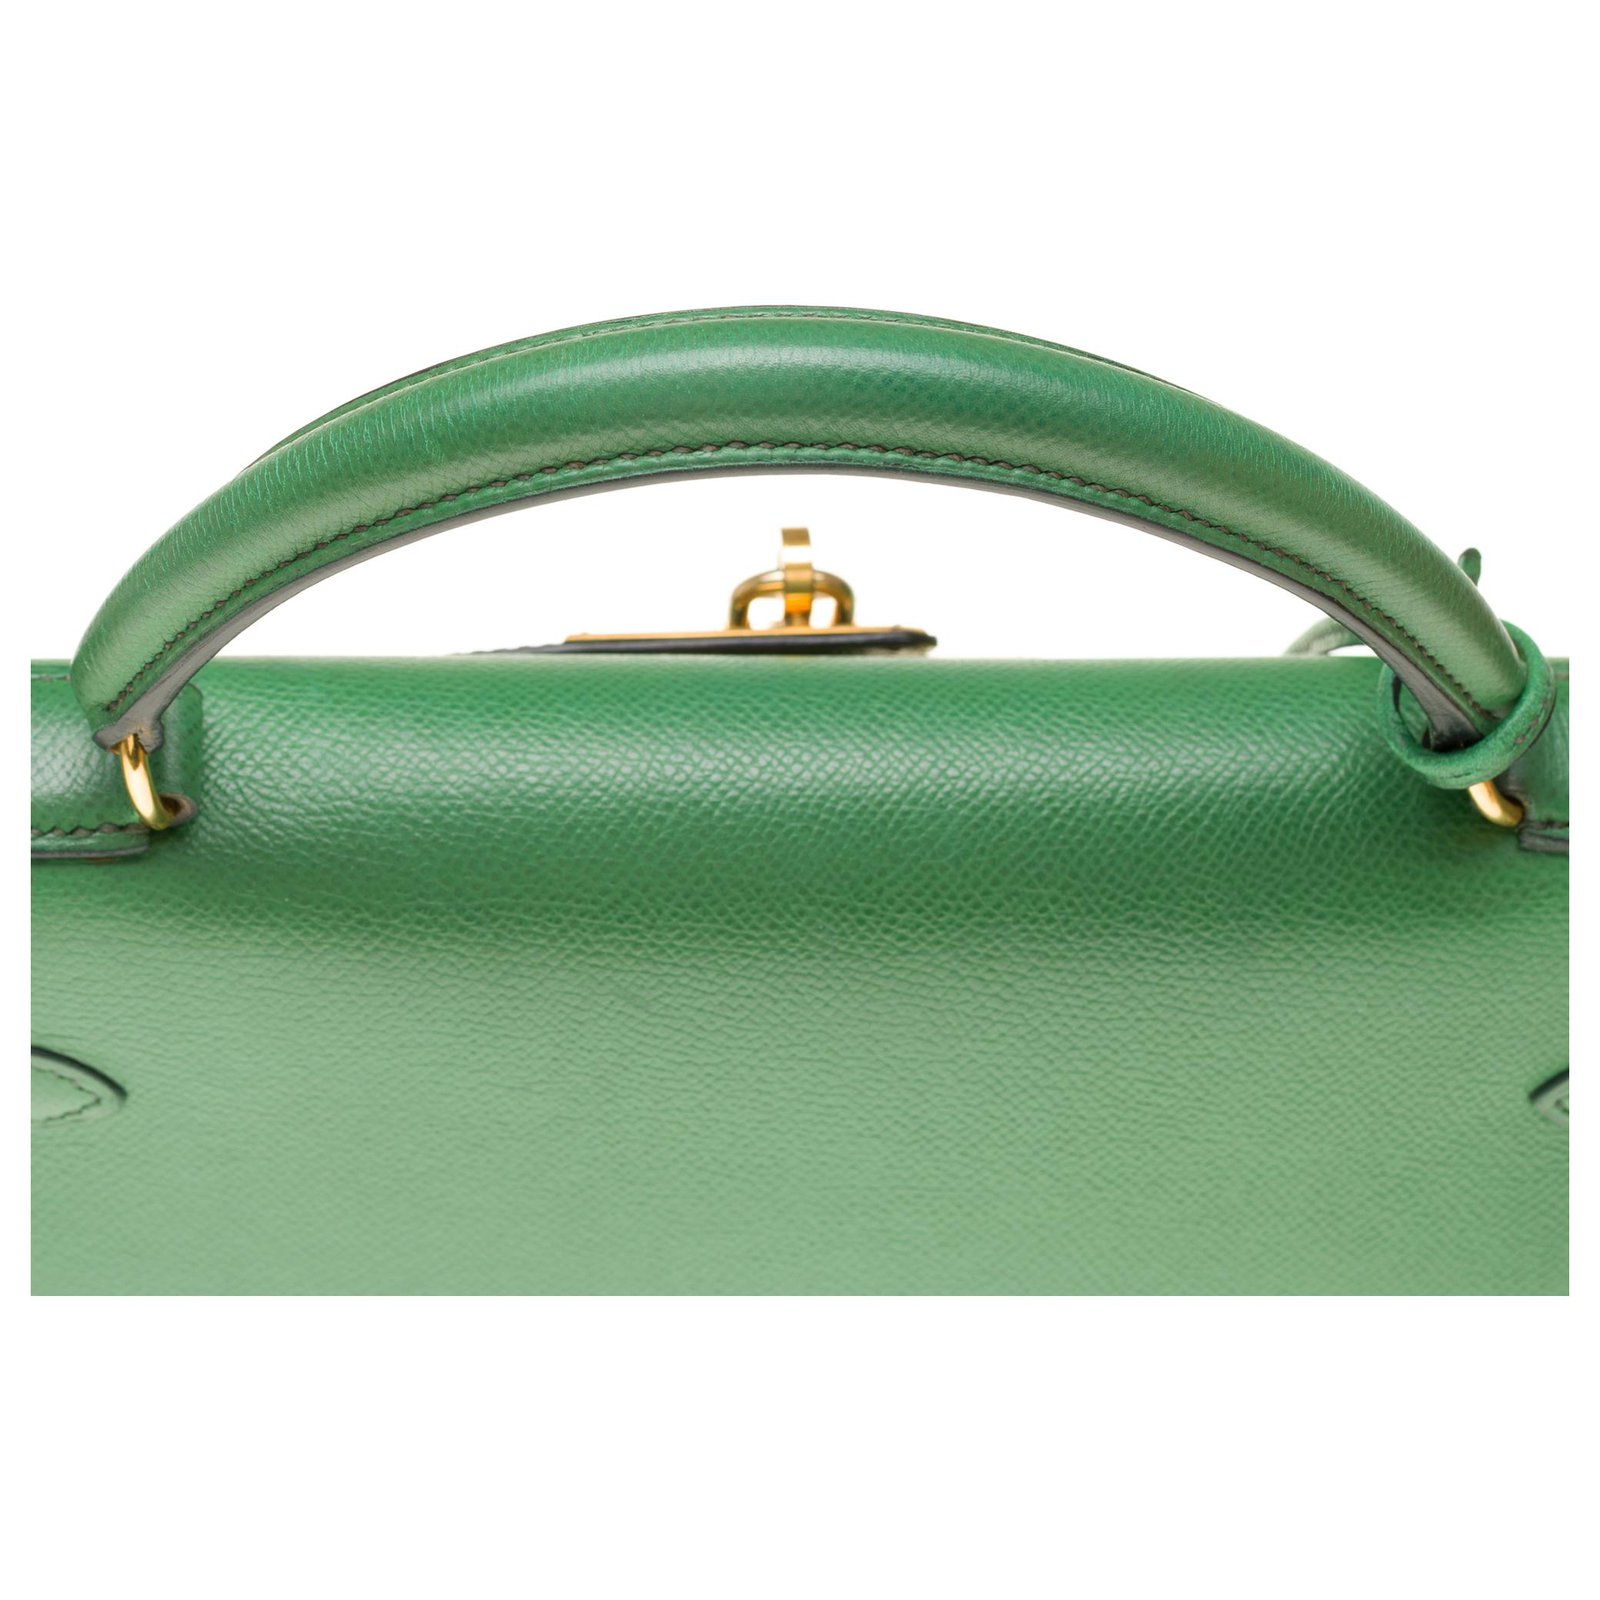 RARE Hermès Kelly 32 sellier handbag with strap in green courchevel and GHW